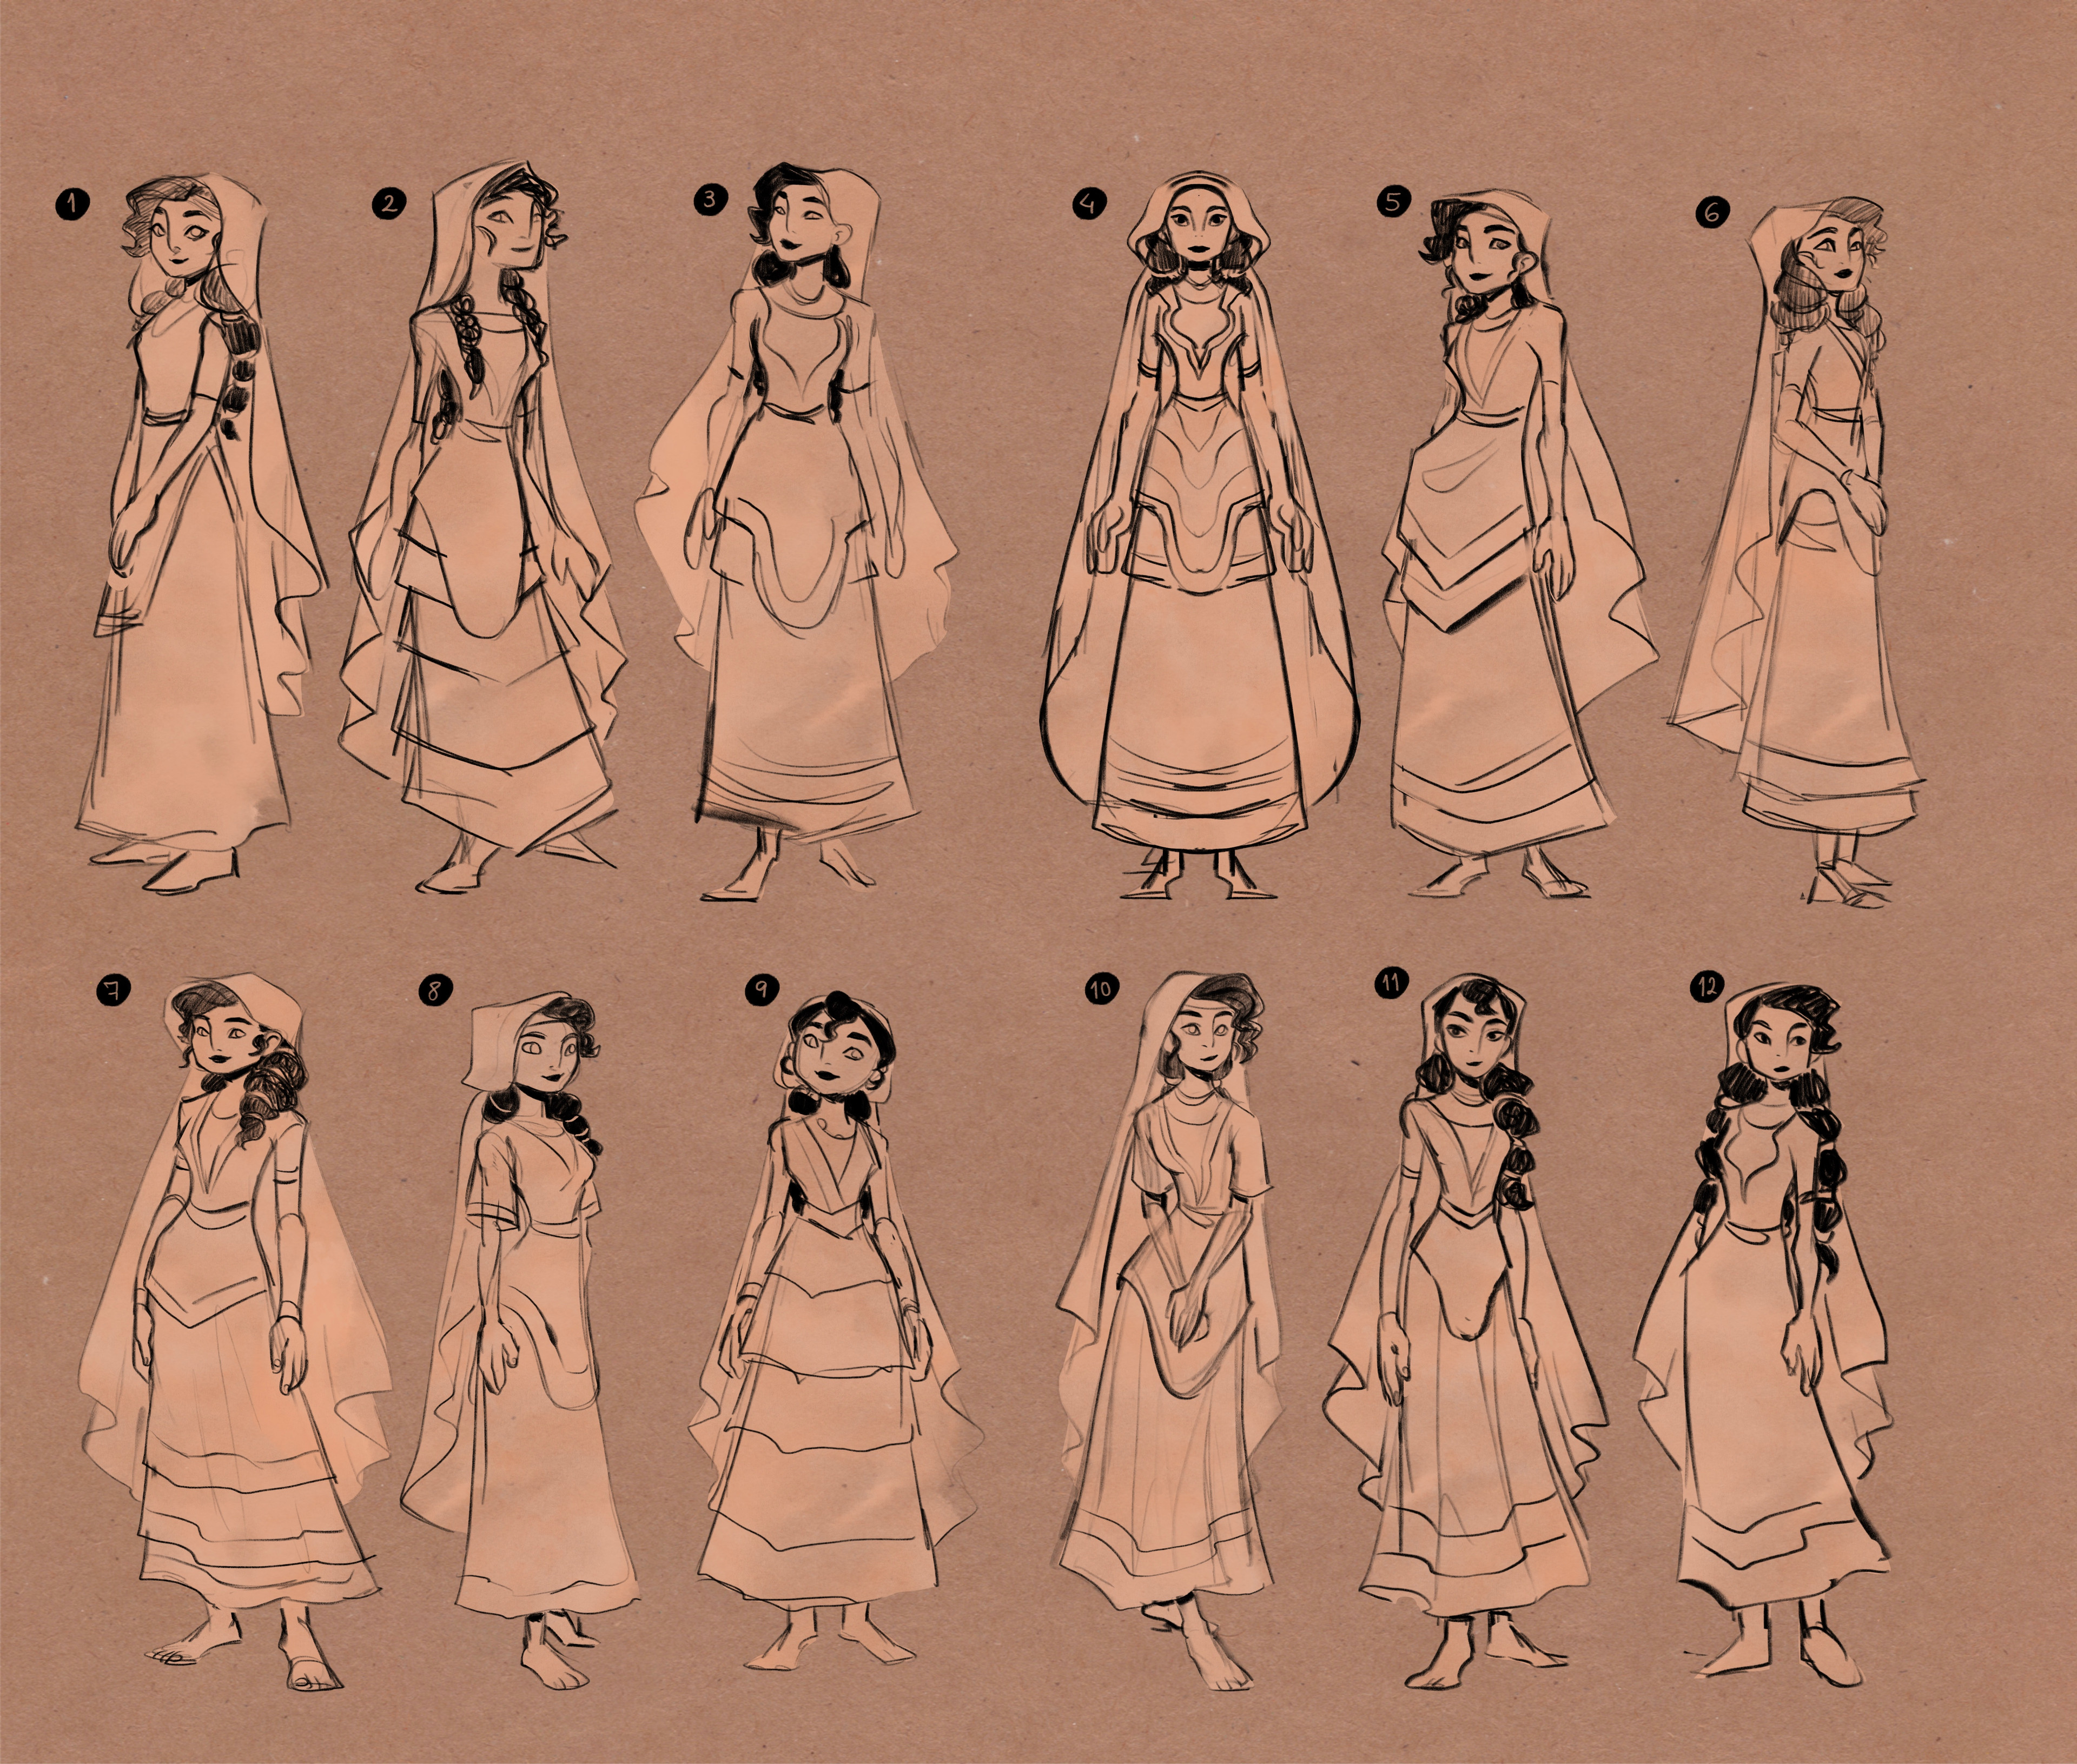 Ariadne character exploration, trying different kinds of silhouettes with Minoan dresses. Felt I could have gone further but at this point we realized she wasn’t gonna show up that much so I had to focus on other things.